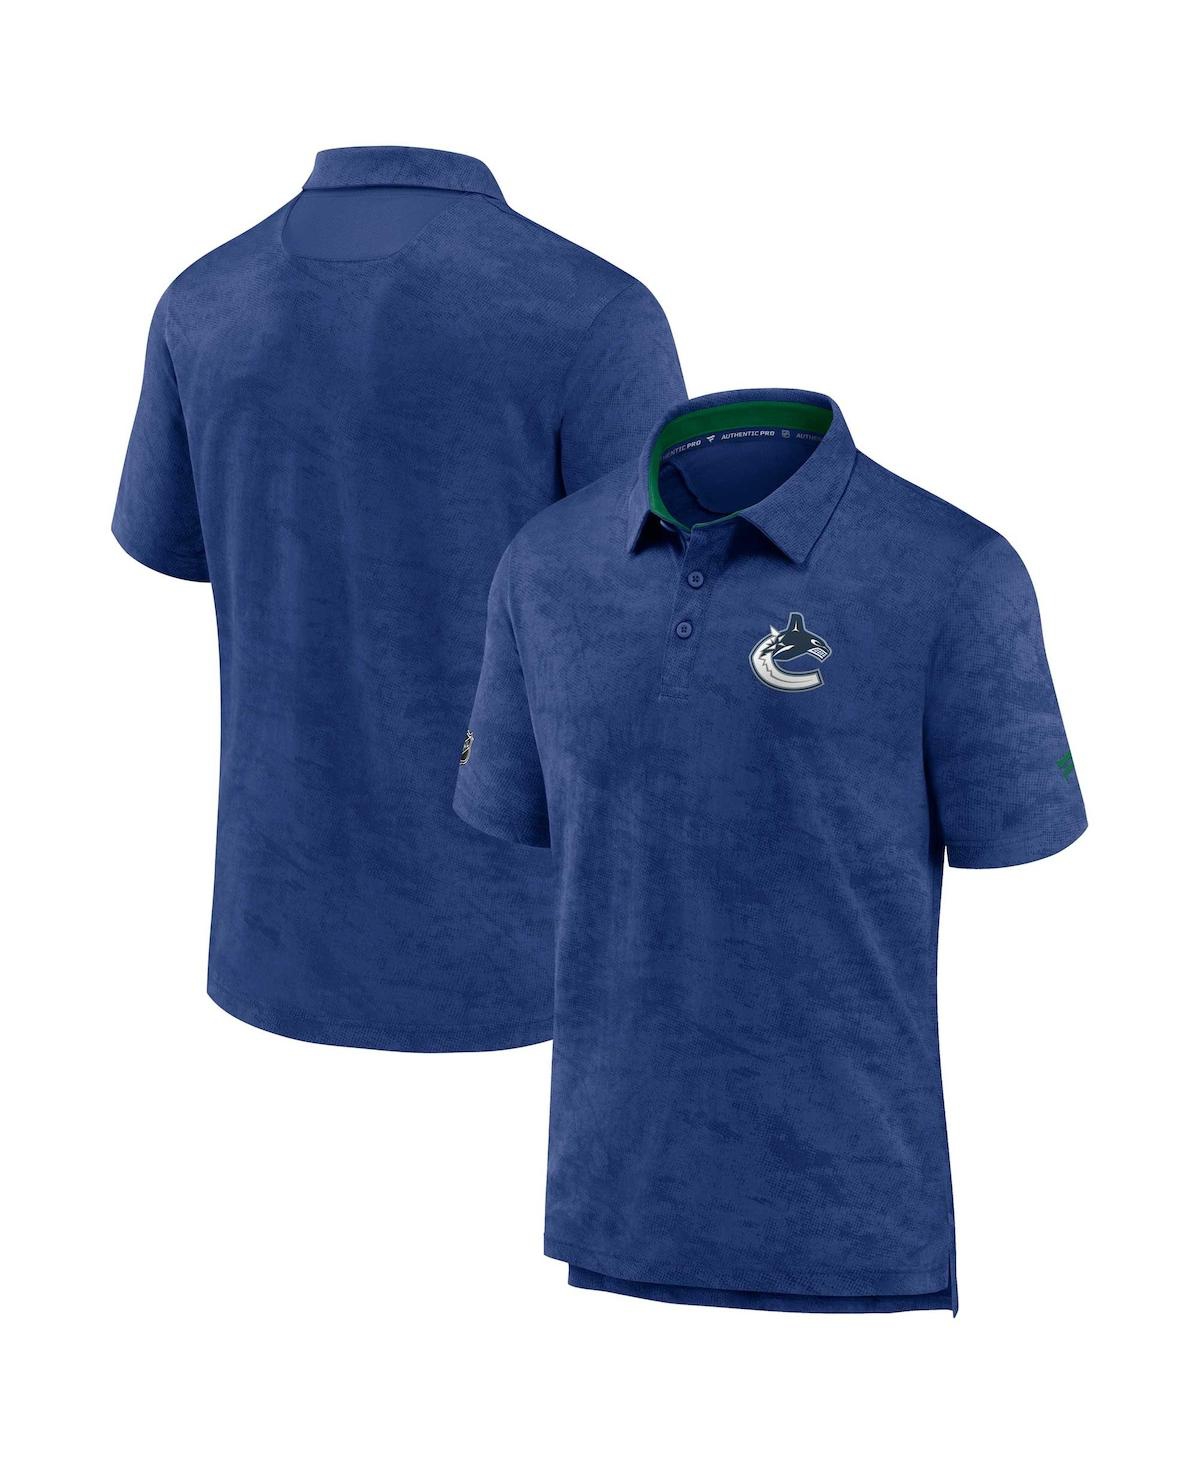 Fanatics Men's Blue Vancouver Canucks Authentic Pro Rink Polo In Blue,green